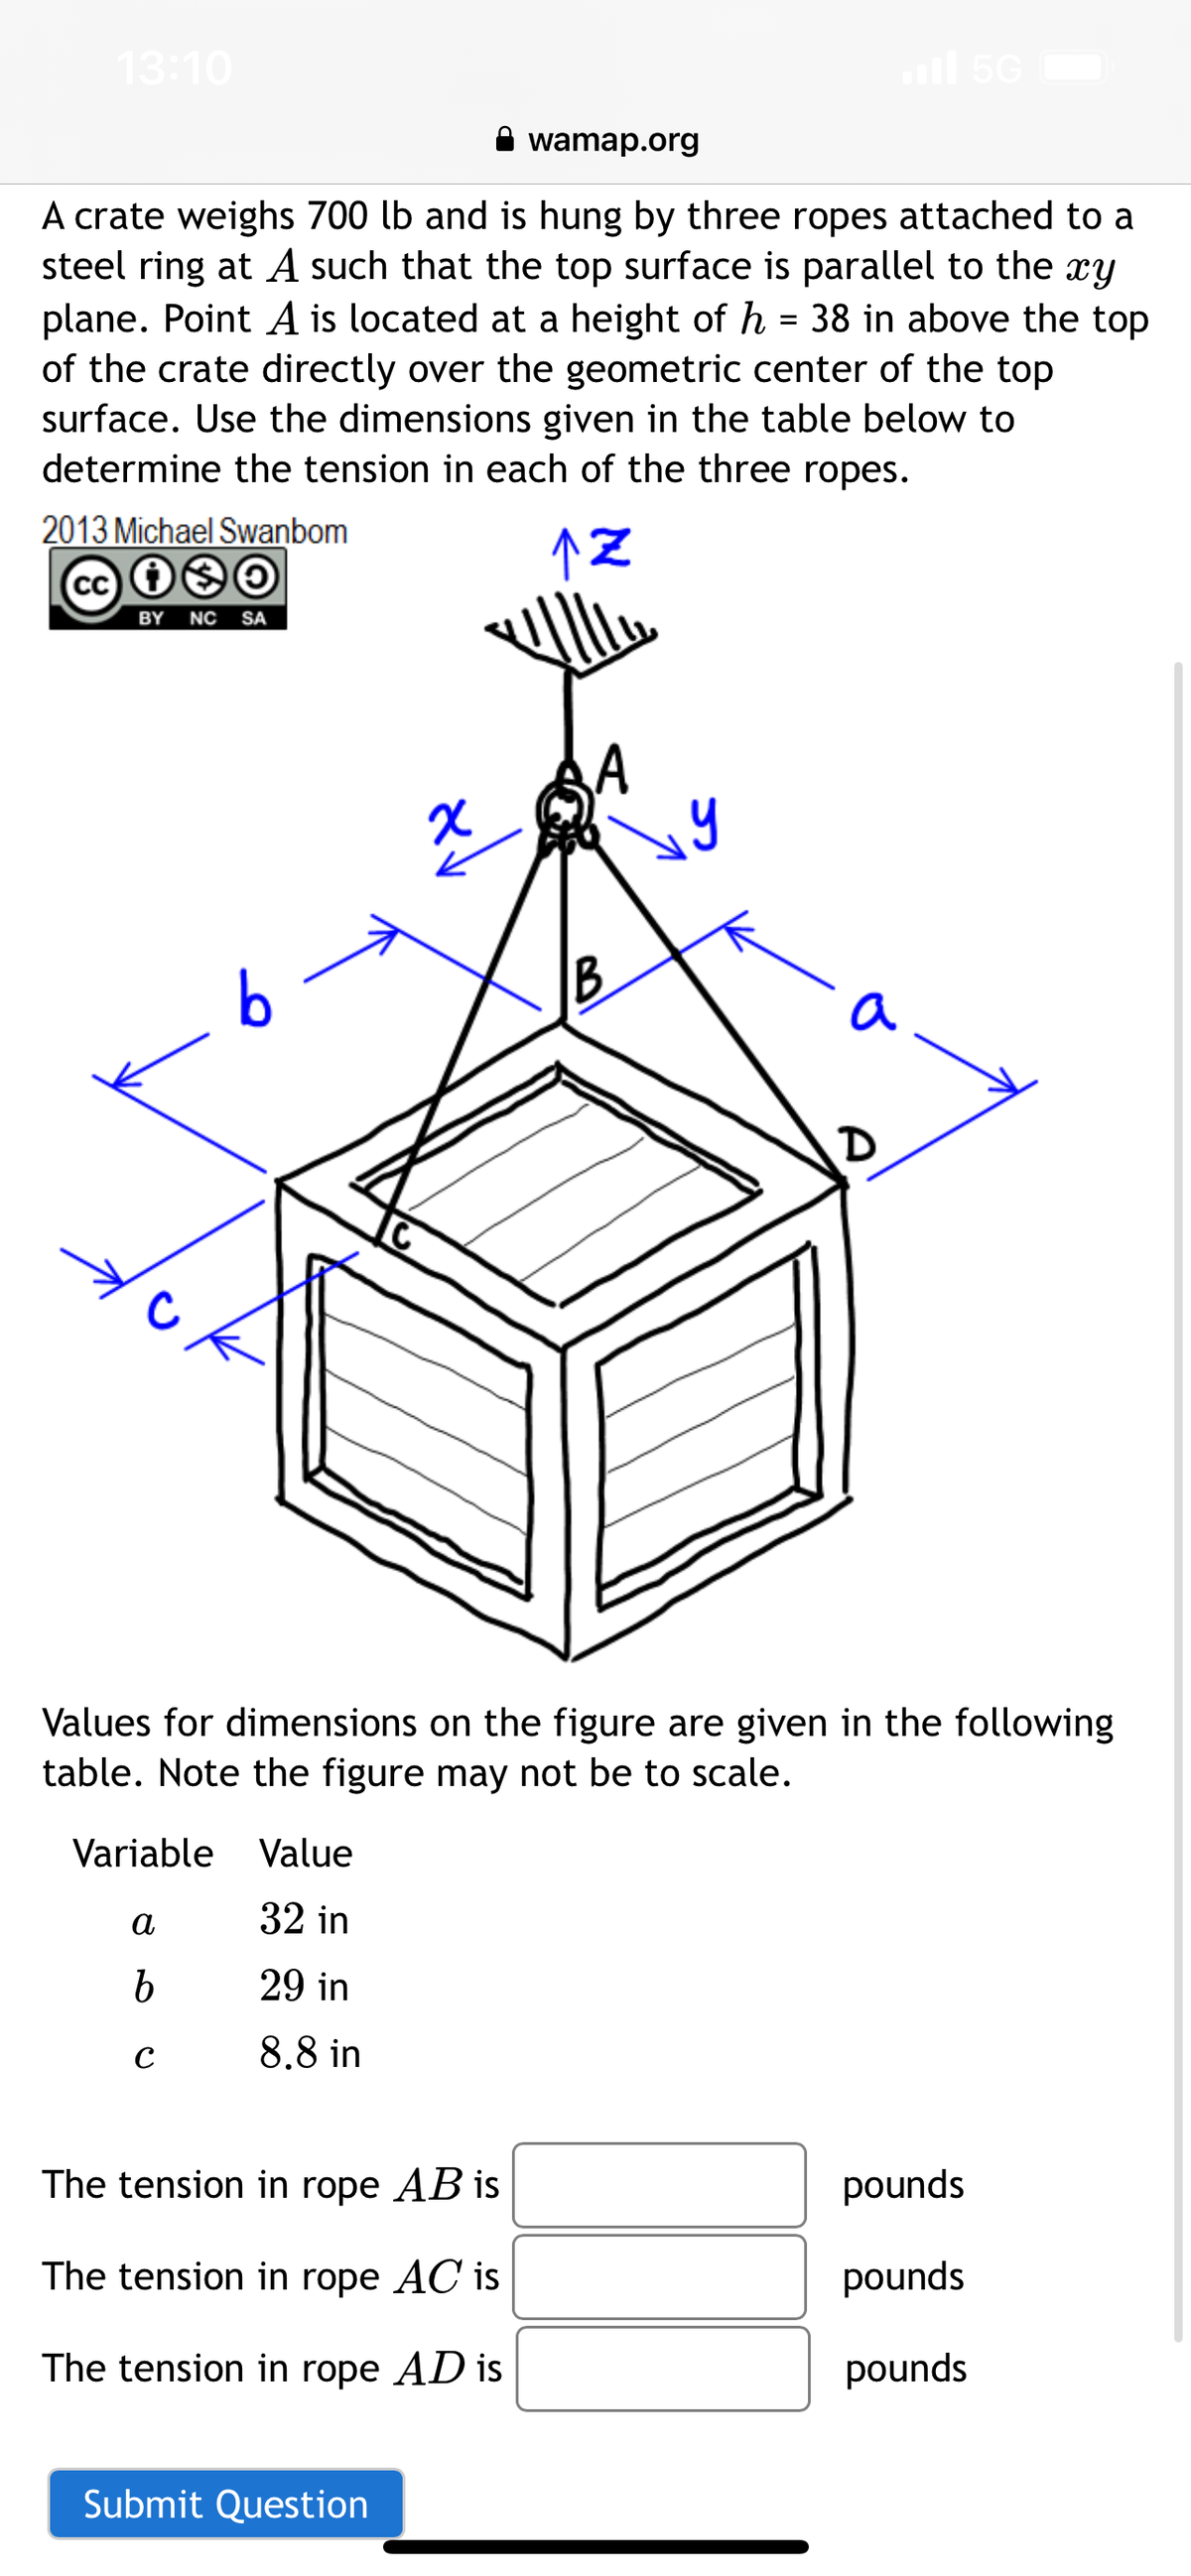 13:10
A crate weighs 700 lb and is hung by three ropes attached to a
steel ring at A such that the top surface is parallel to the xy
plane. Point A is located at a height of h = 38 in above the top
of the crate directly over the geometric center of the top
surface. Use the dimensions given in the table below to
determine the tension in each of the three ropes.
↑Z
2013 Michael Swanbom
cc i❀O
BY NC SA
с
6
Variable Value
32 in
29 in
8.8 in
a
b
с
wamap.org
The tension in rope AB is
The tension in rope AC is
The tension in rope AD is
Values for dimensions on the figure are given in the following
table. Note the figure may not be to scale.
Submit Question
B
y
a
D
pounds
pounds
pounds